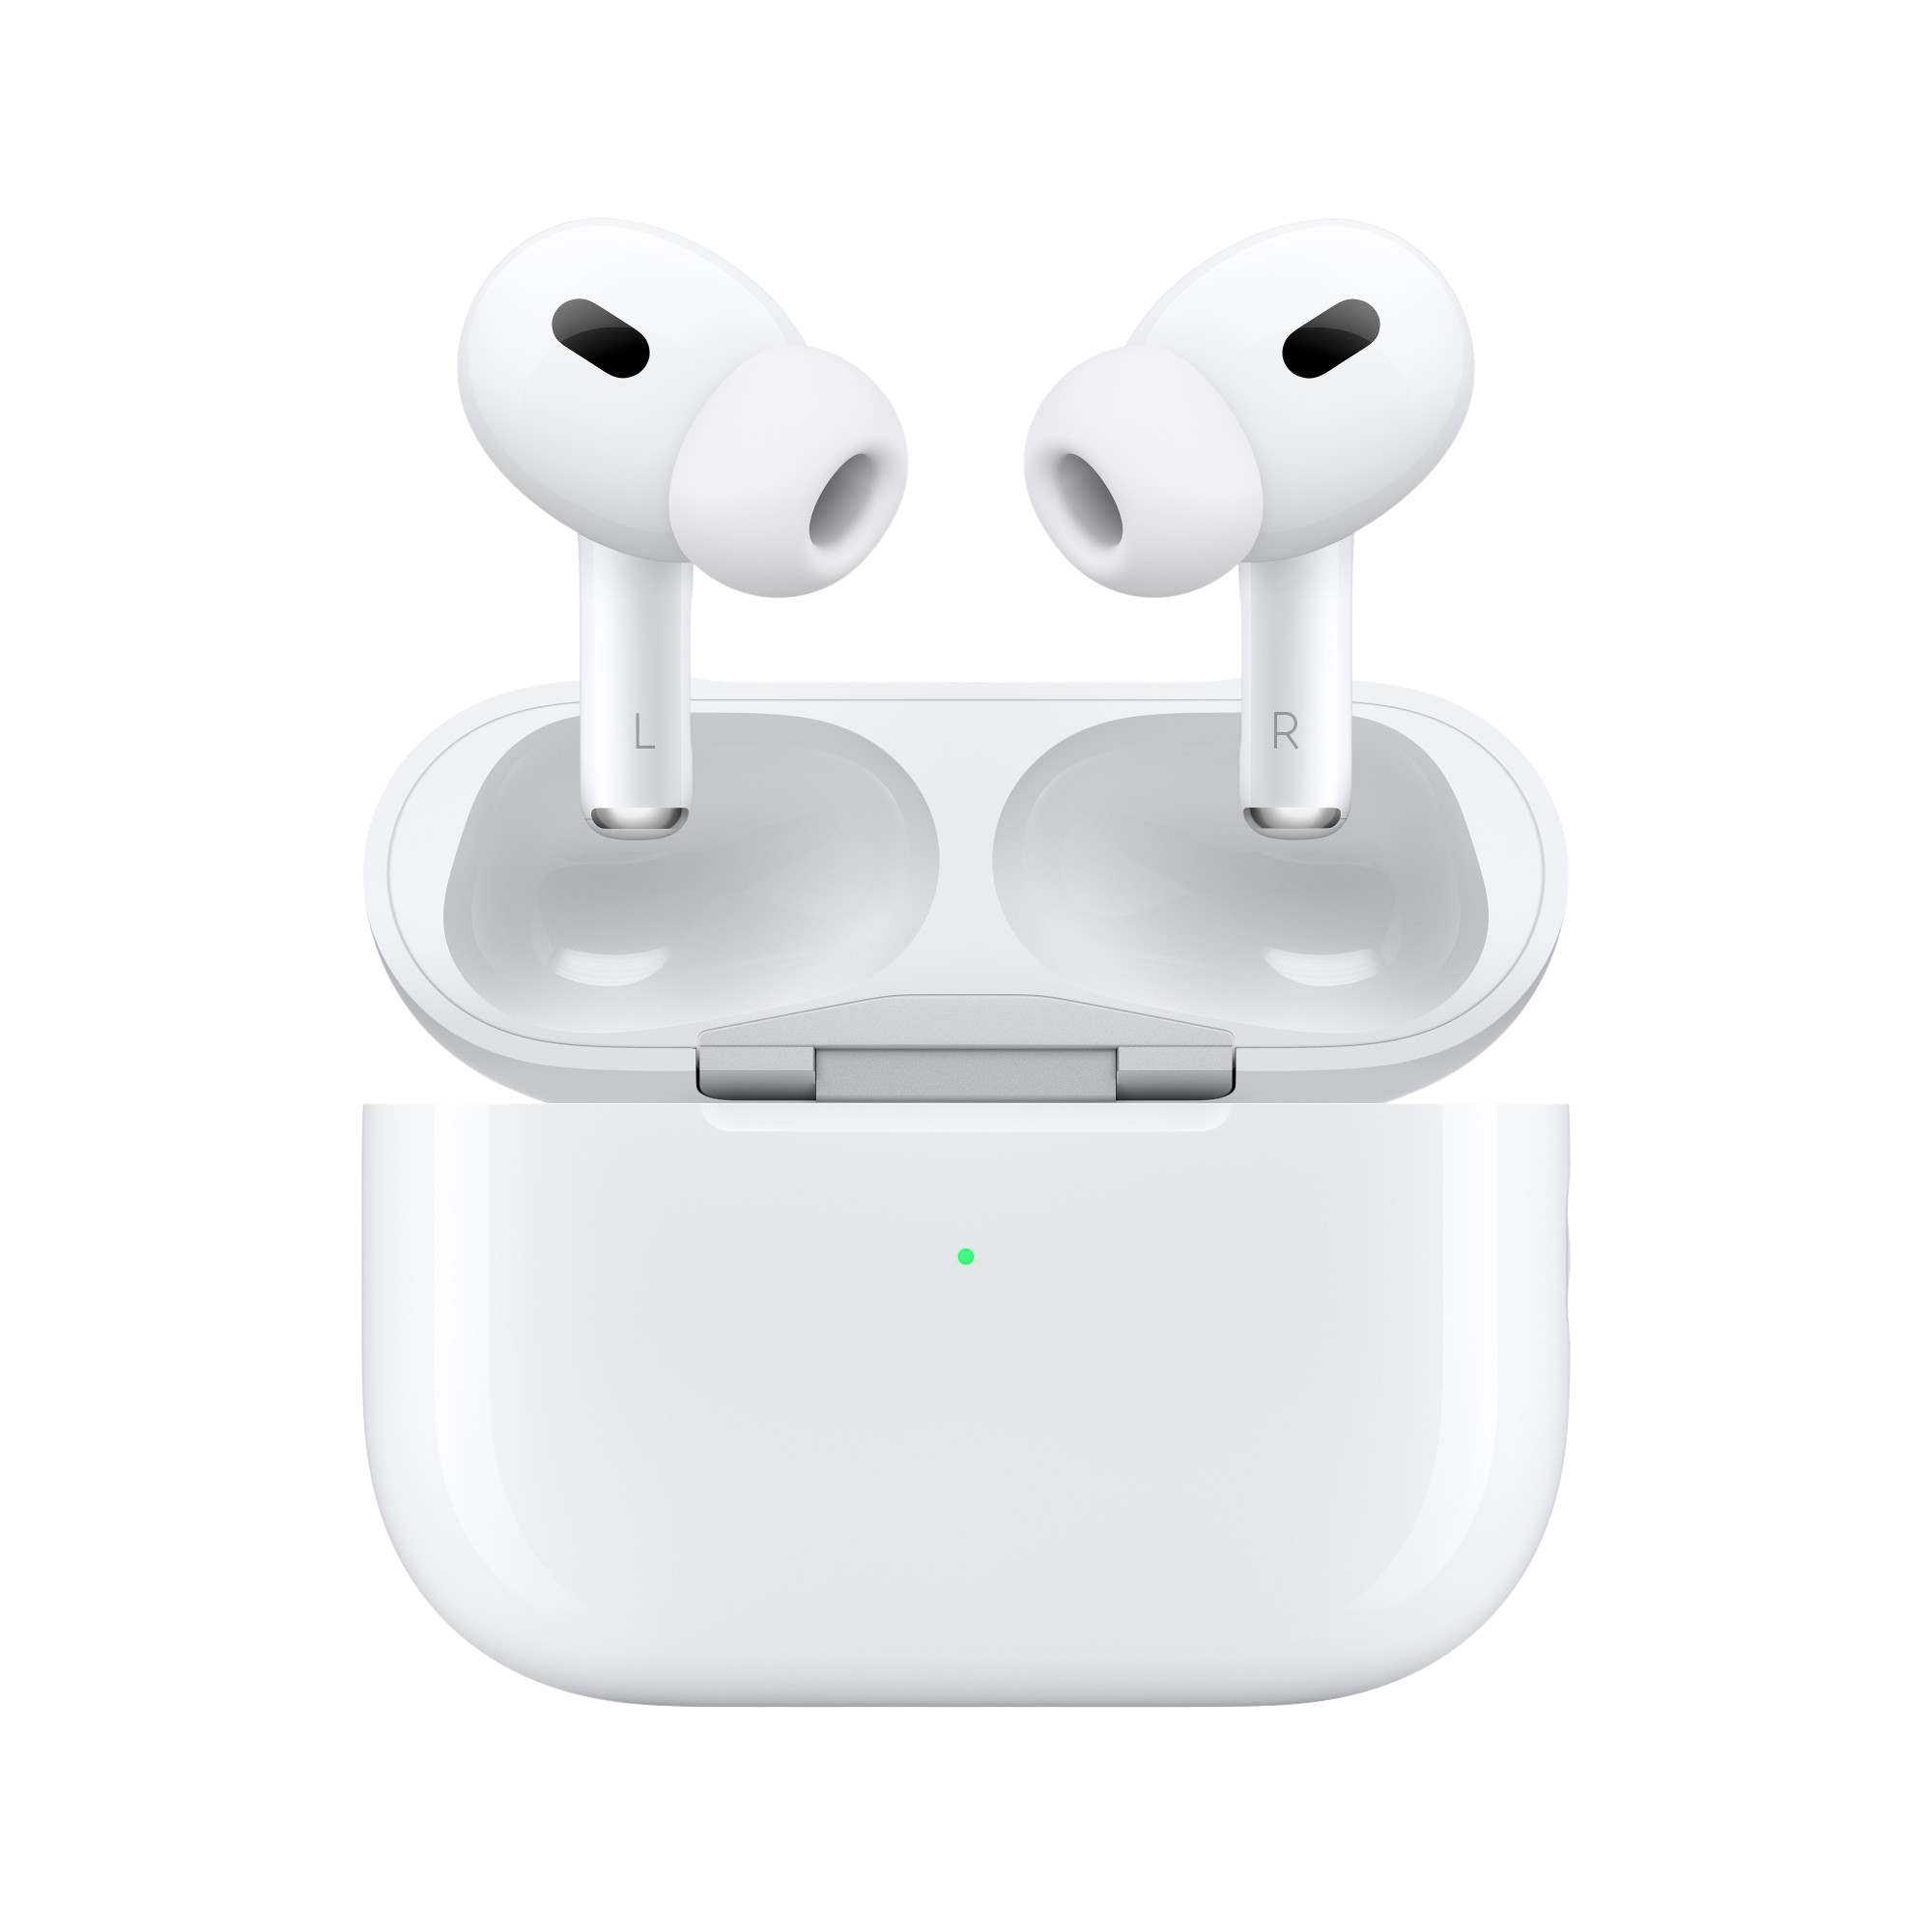 Rent Apple Airpods Pro 2 with USB-C In-ear Bluetooth Headphones